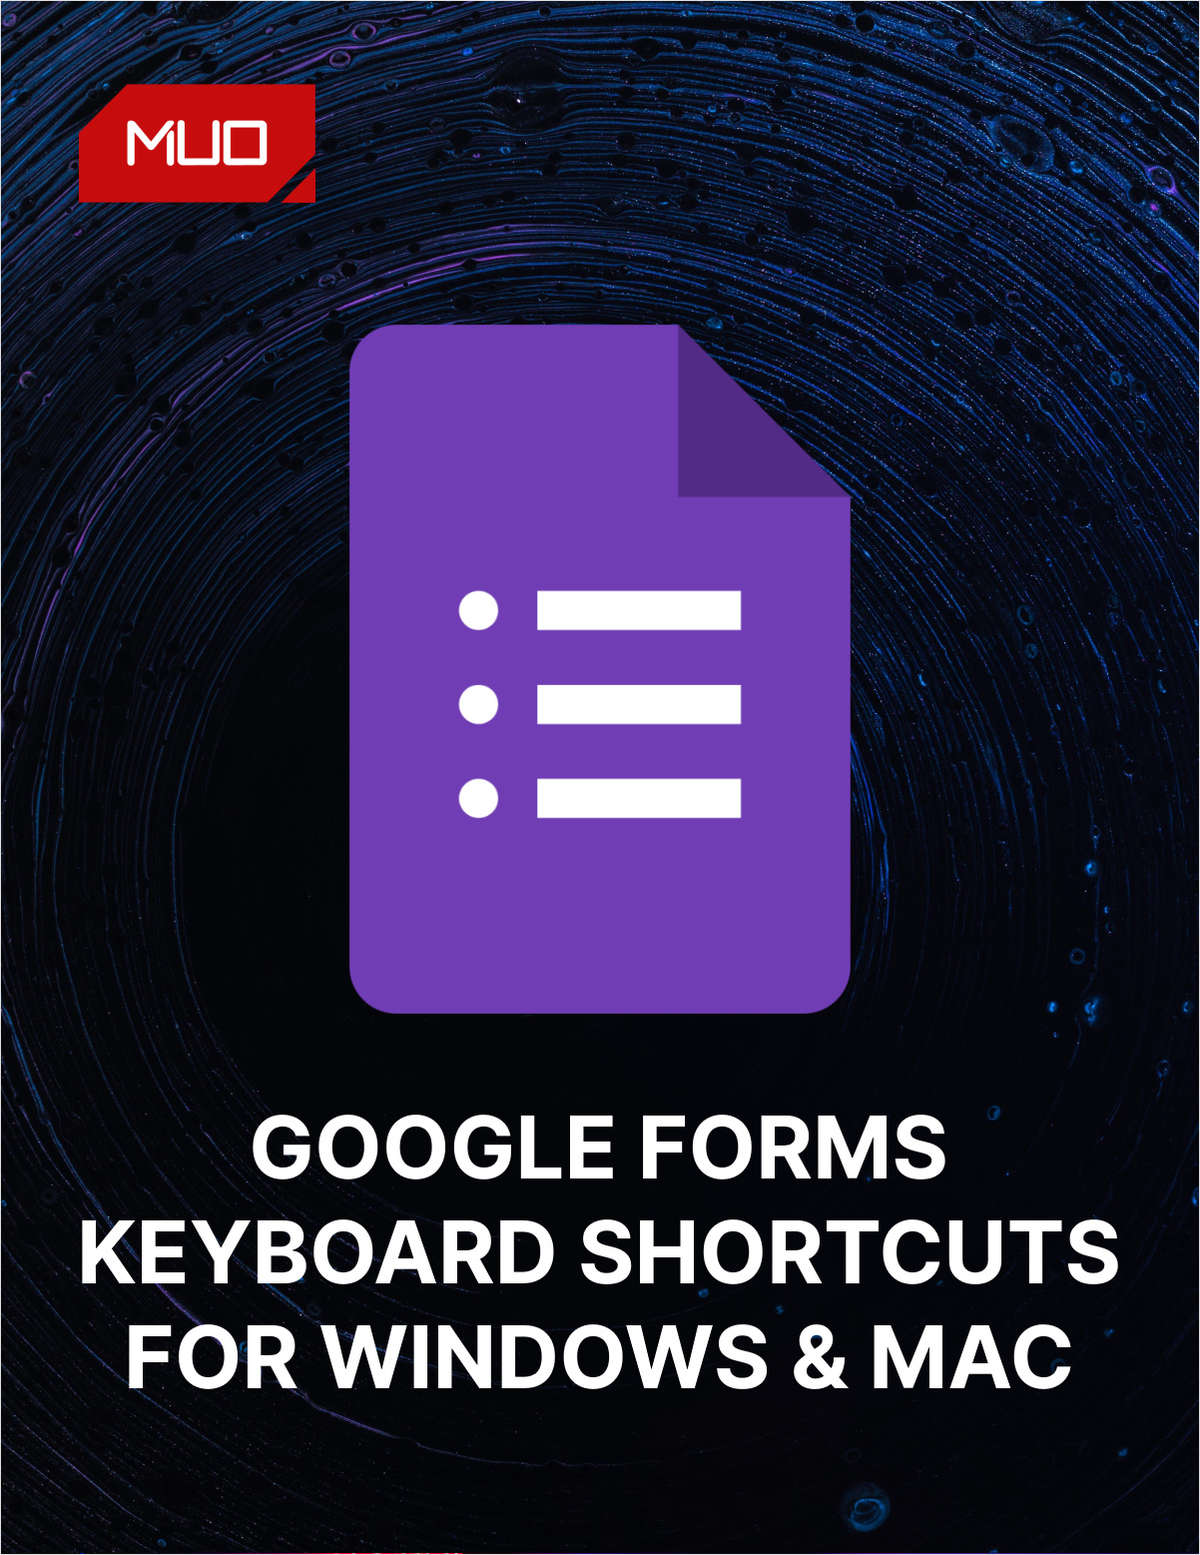 Google Forms: Every Keyboard Shortcut You Need for Windows and Mac